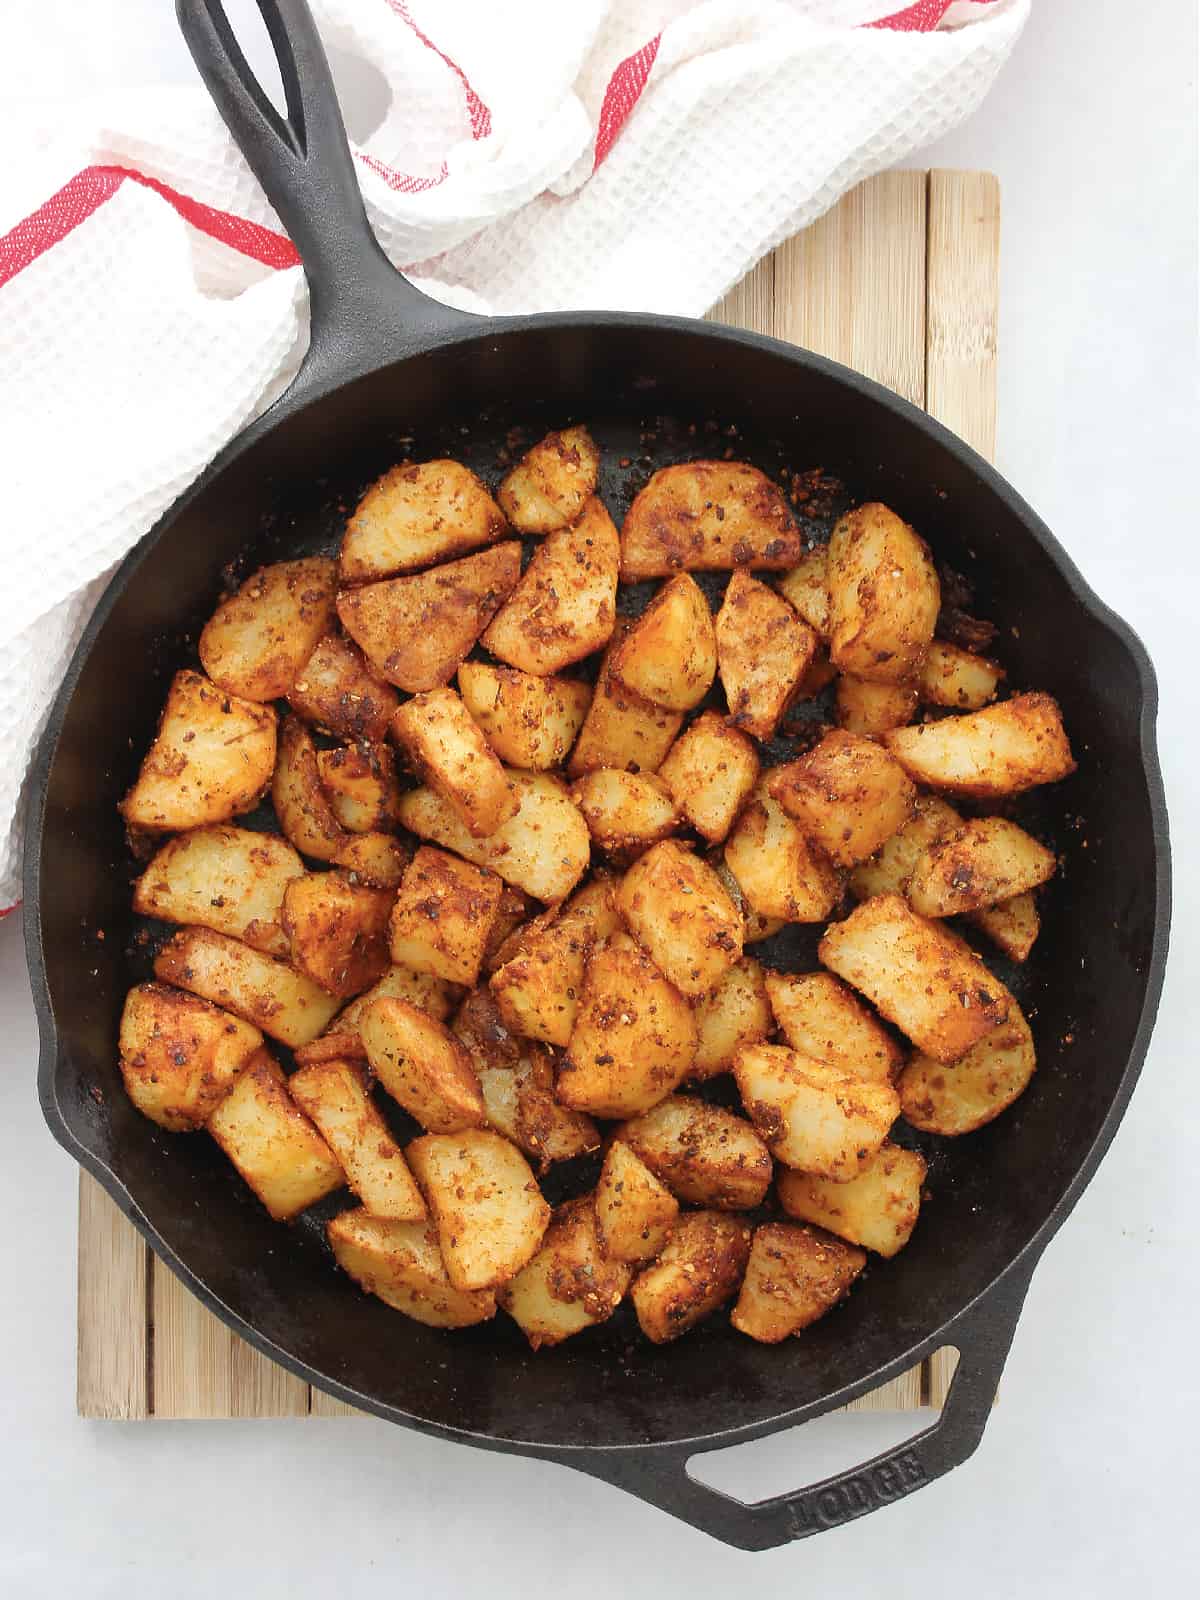 Roasted piri piri potatoes in a cast iron skillet on a wooden chopping board.